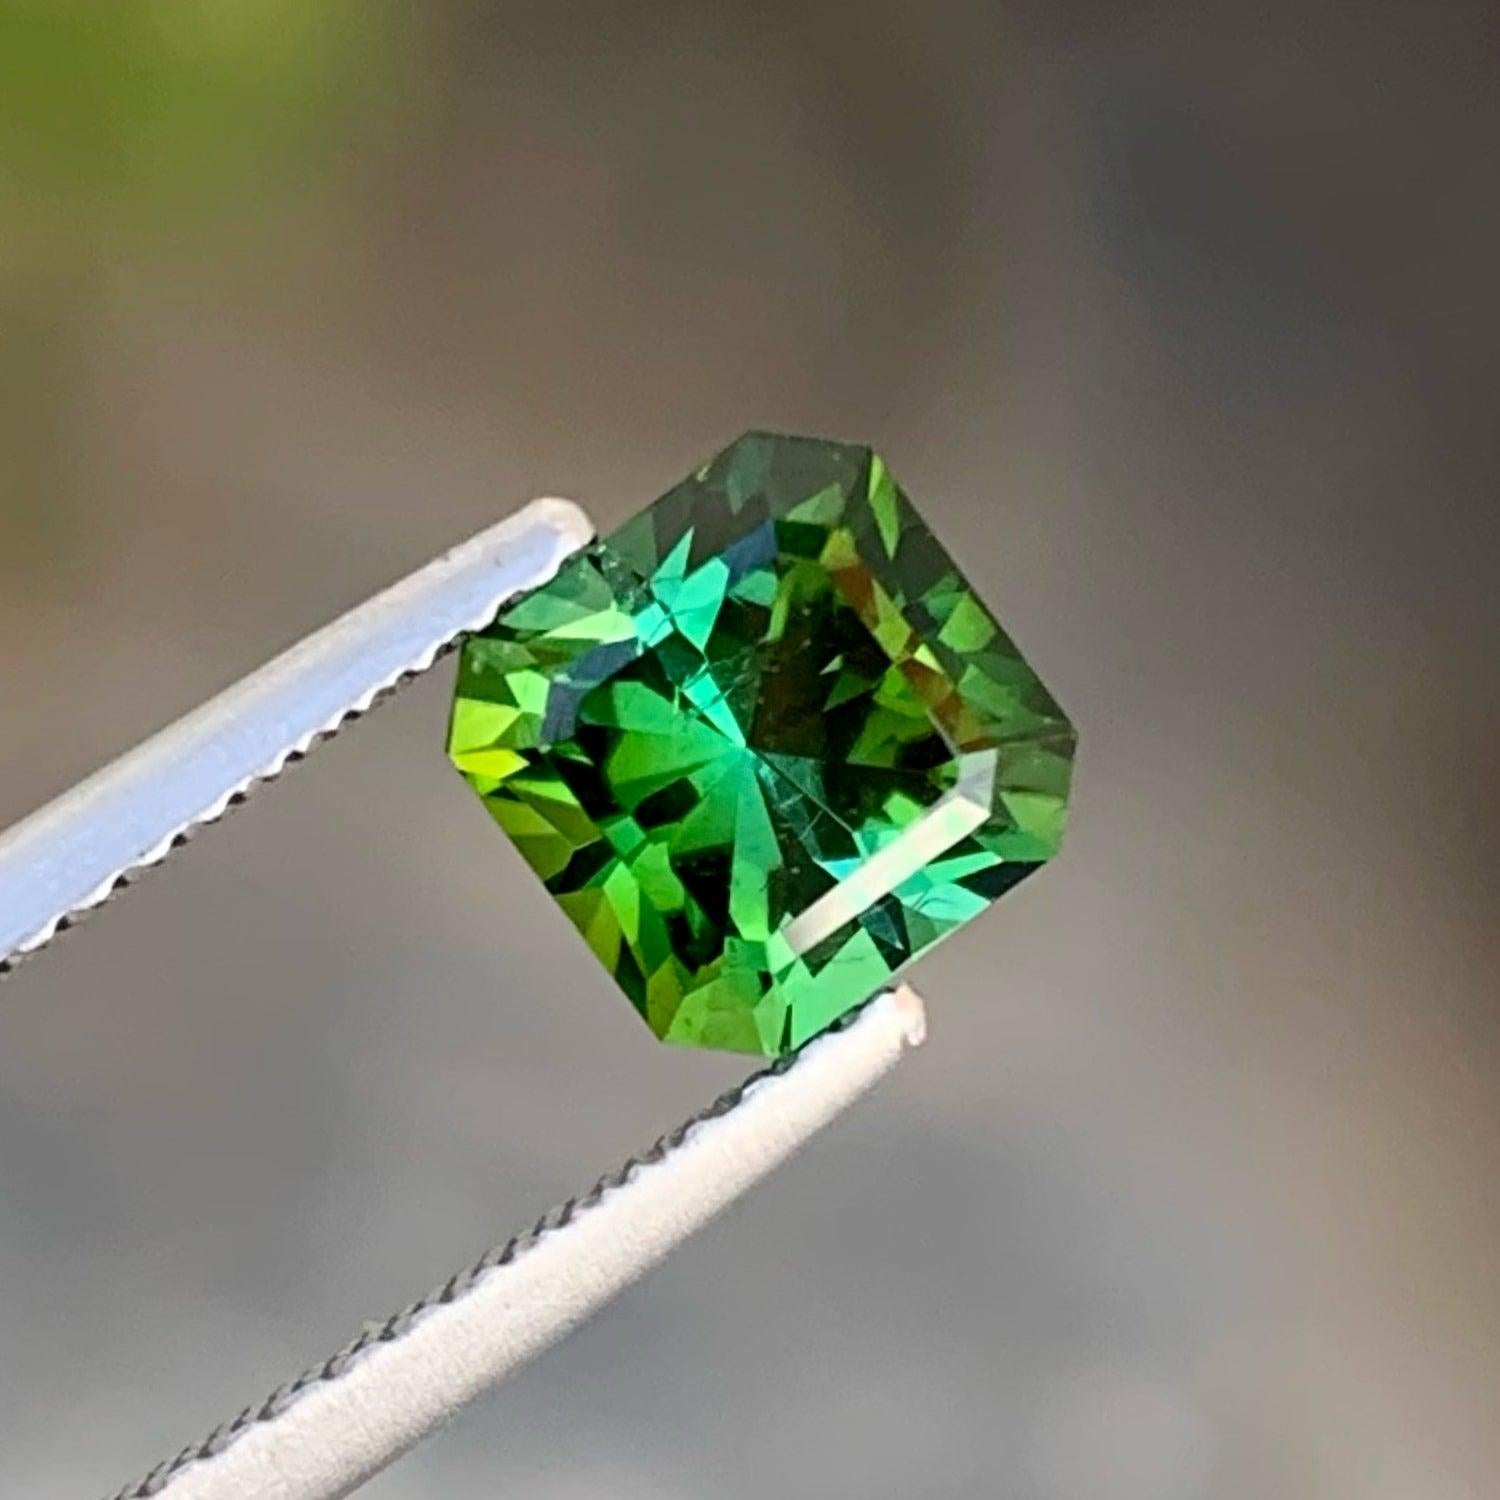 Fantasy Bluish Green Tourmaline Gemstone, Available For Sale At Wholesale Price Natural High Quality 1.40 Carats SI Clean Clarity Natural Tourmaline From Afghanistan.

Product Information:

GEMSTONE TYPE: Fantasy Bluish Green Tourmaline